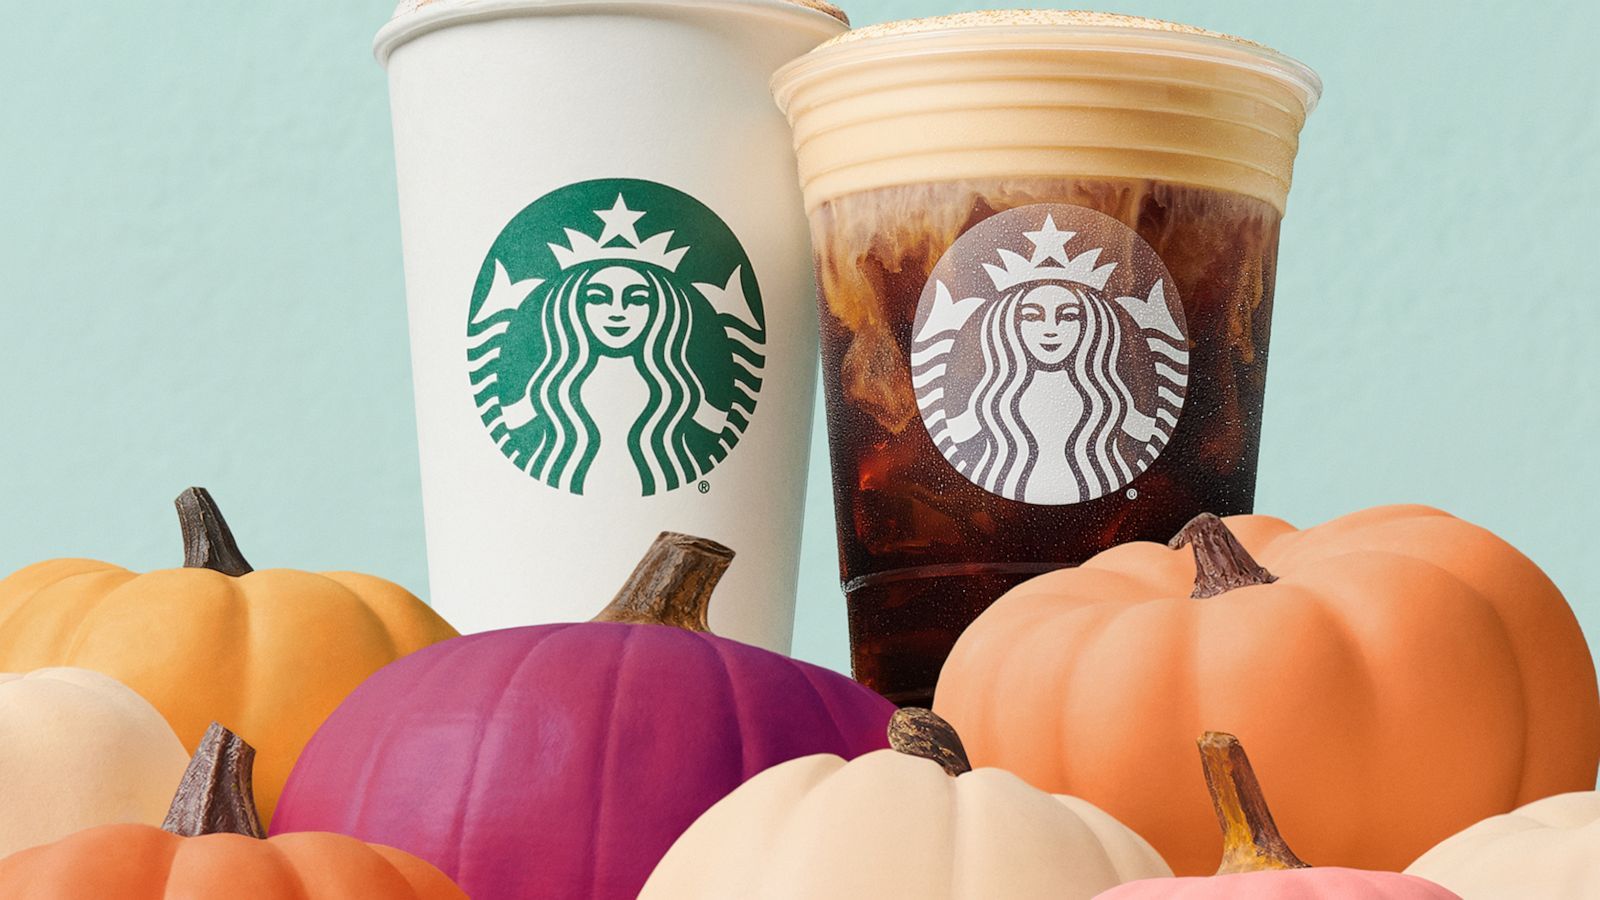 It's officially fall at Starbucks as pumpkin spice lattes make their earliest debut yet Morning America